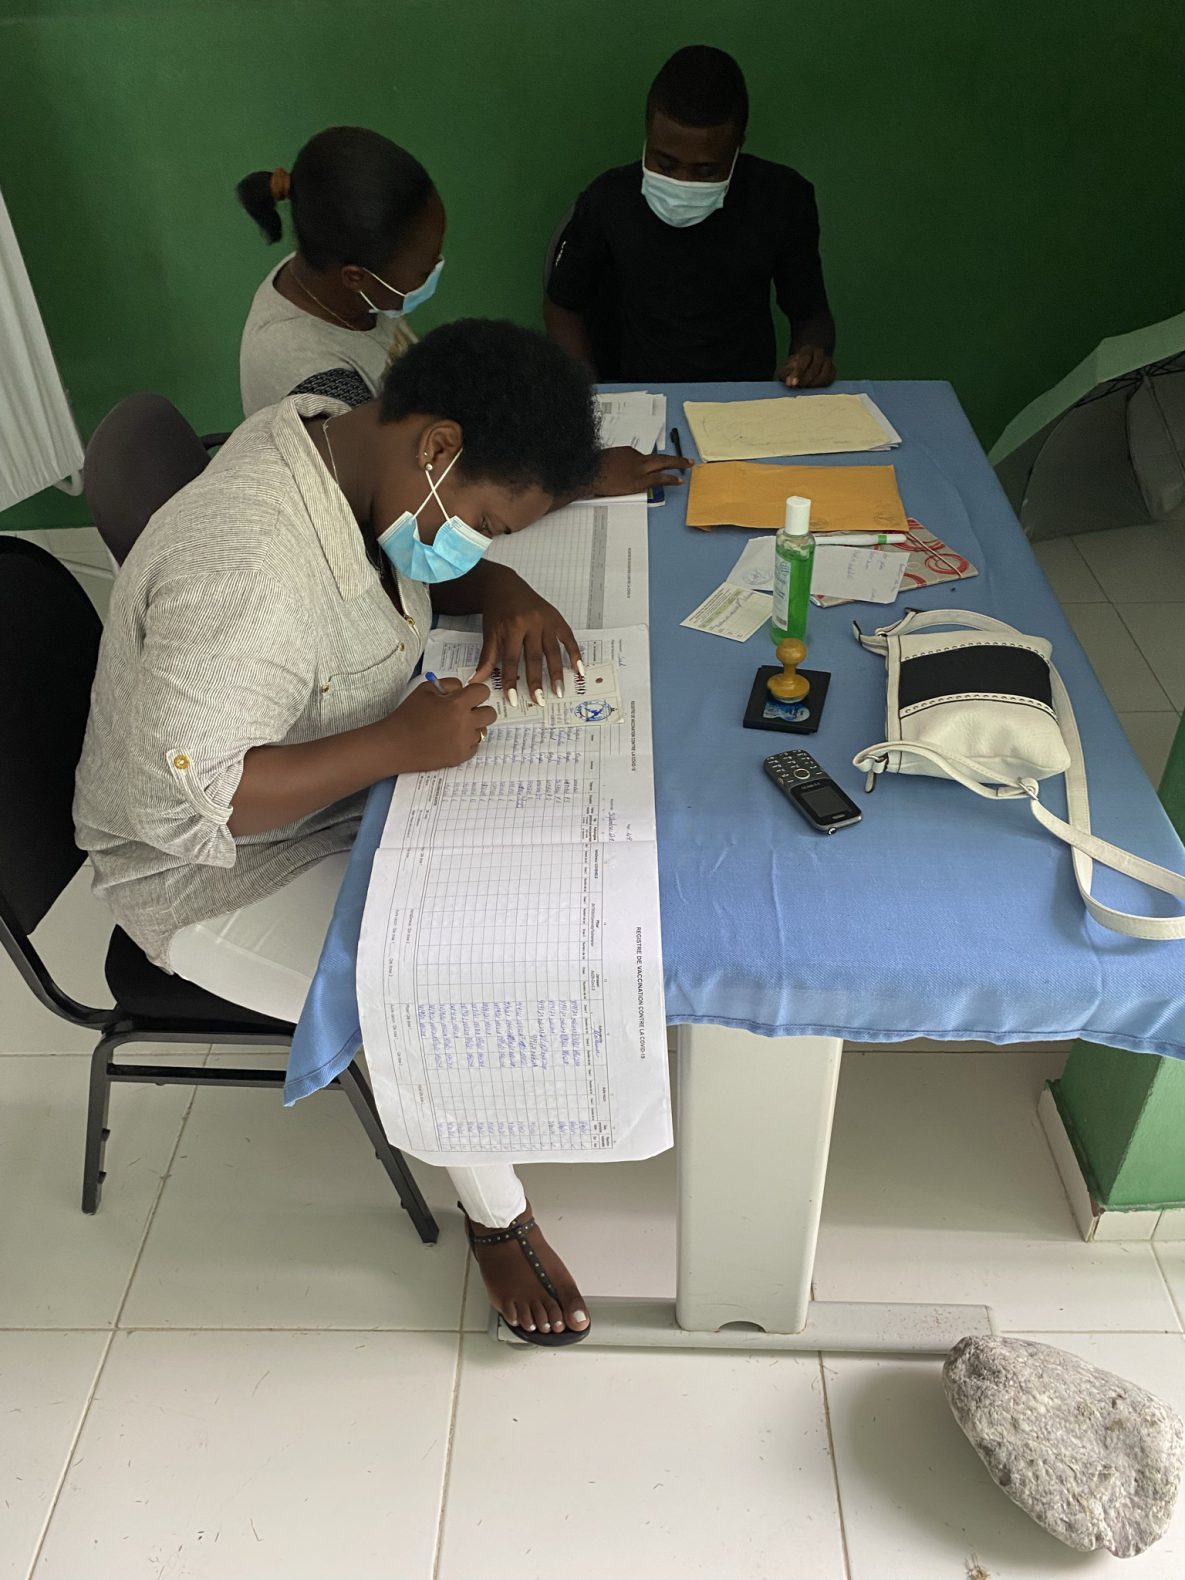 Ministry of Public Health and Population COVID-19 vaccination site funded by CDC in Les Cayes, Haiti on October 21, 2021.